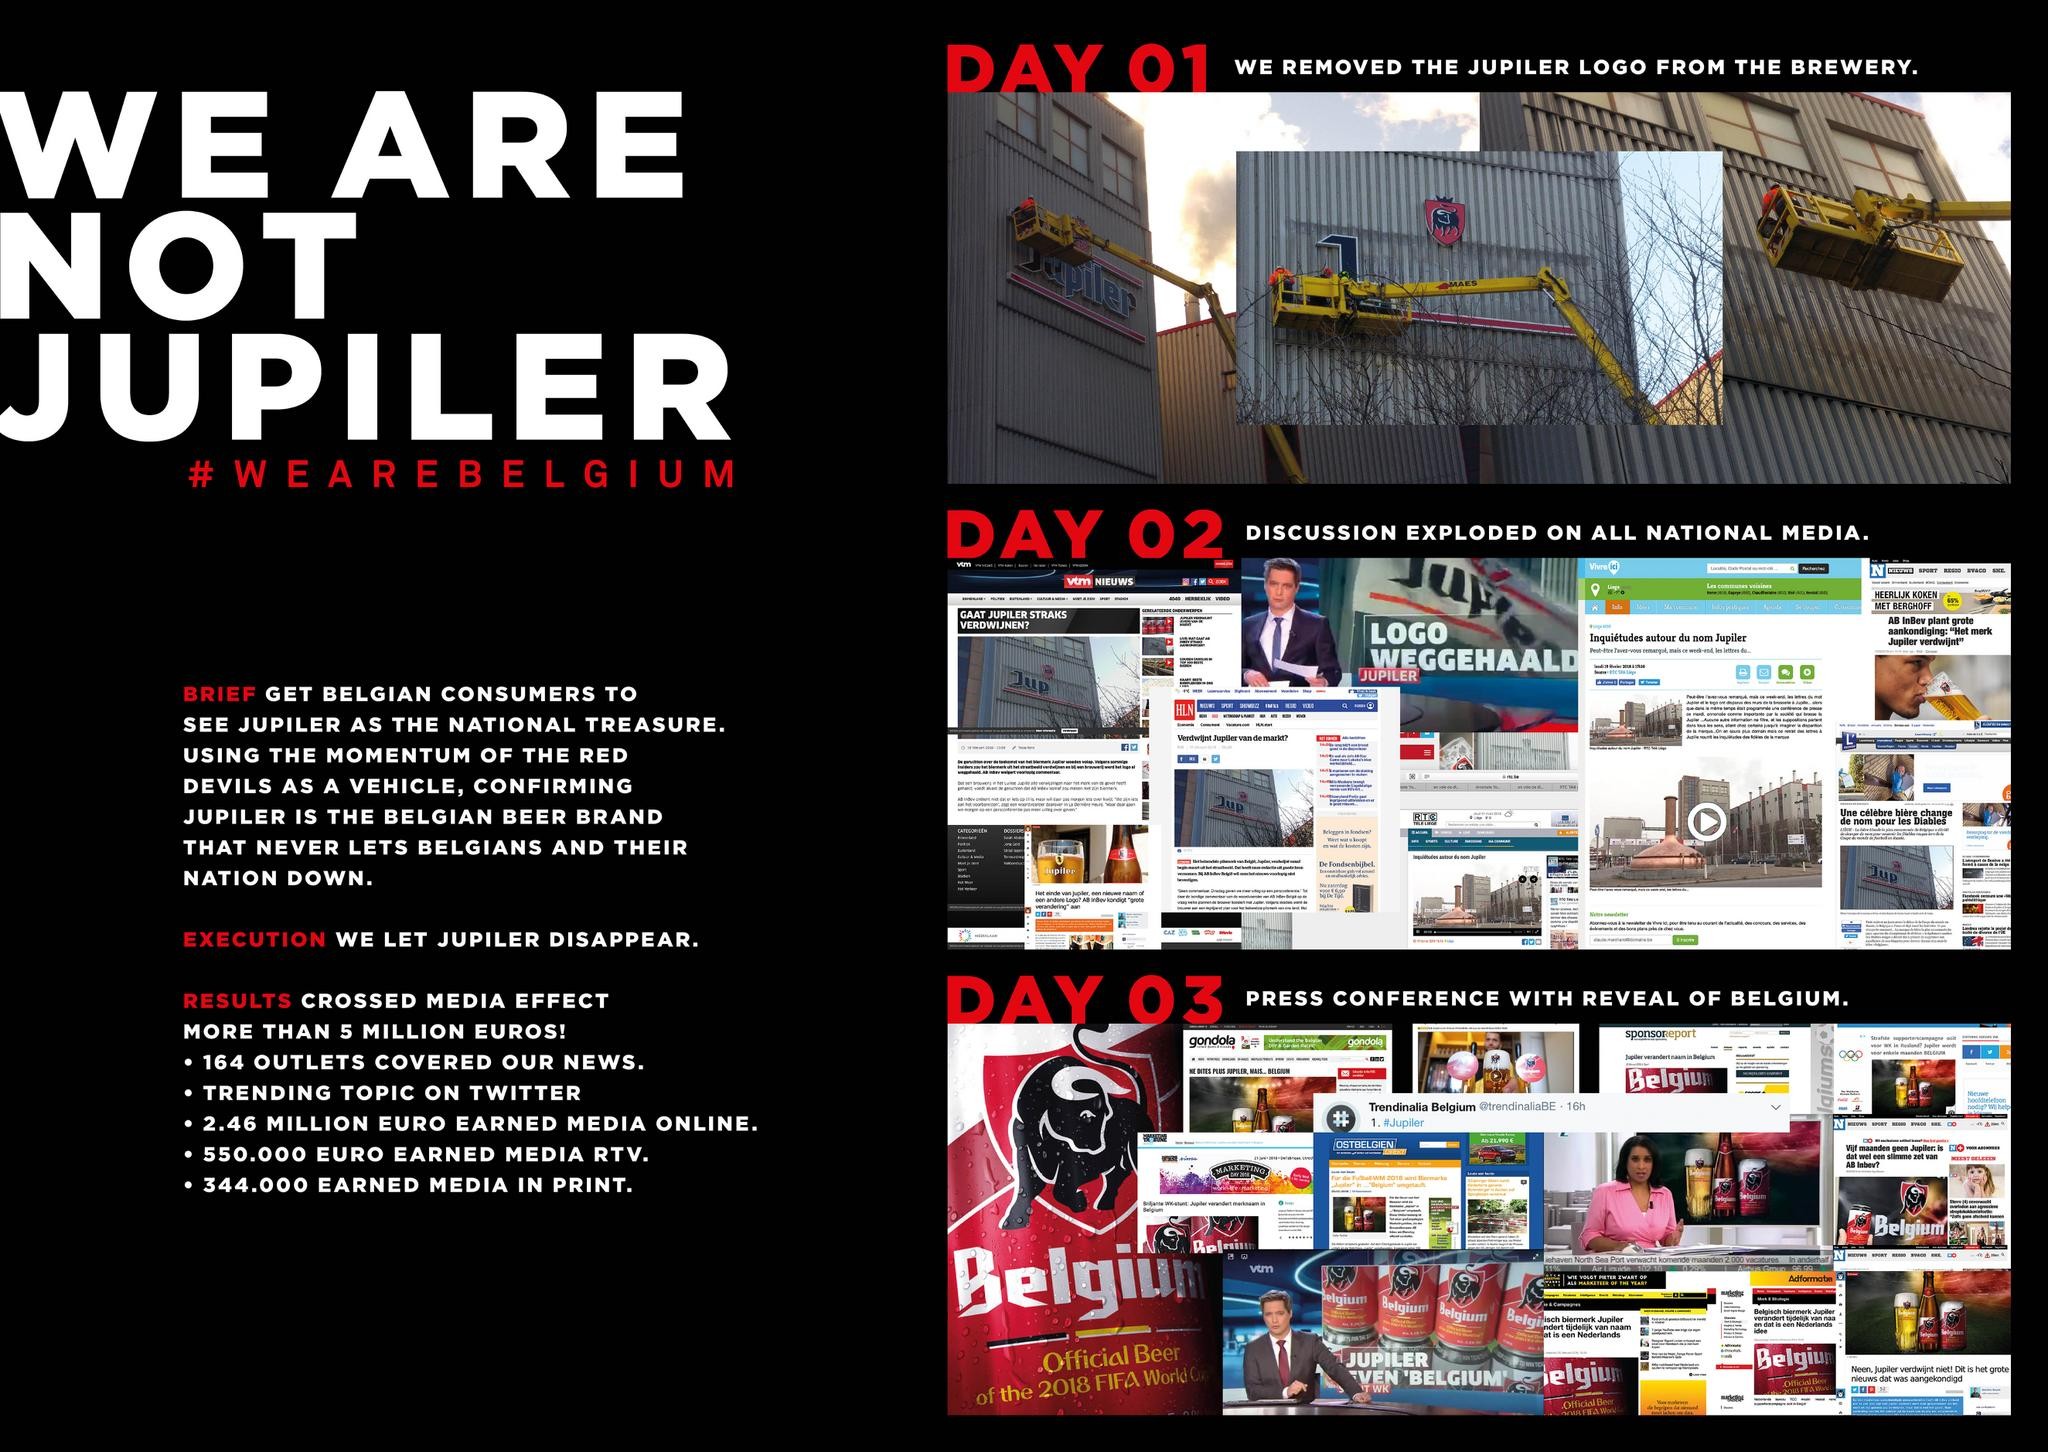 "The disappearance of Jupiler"